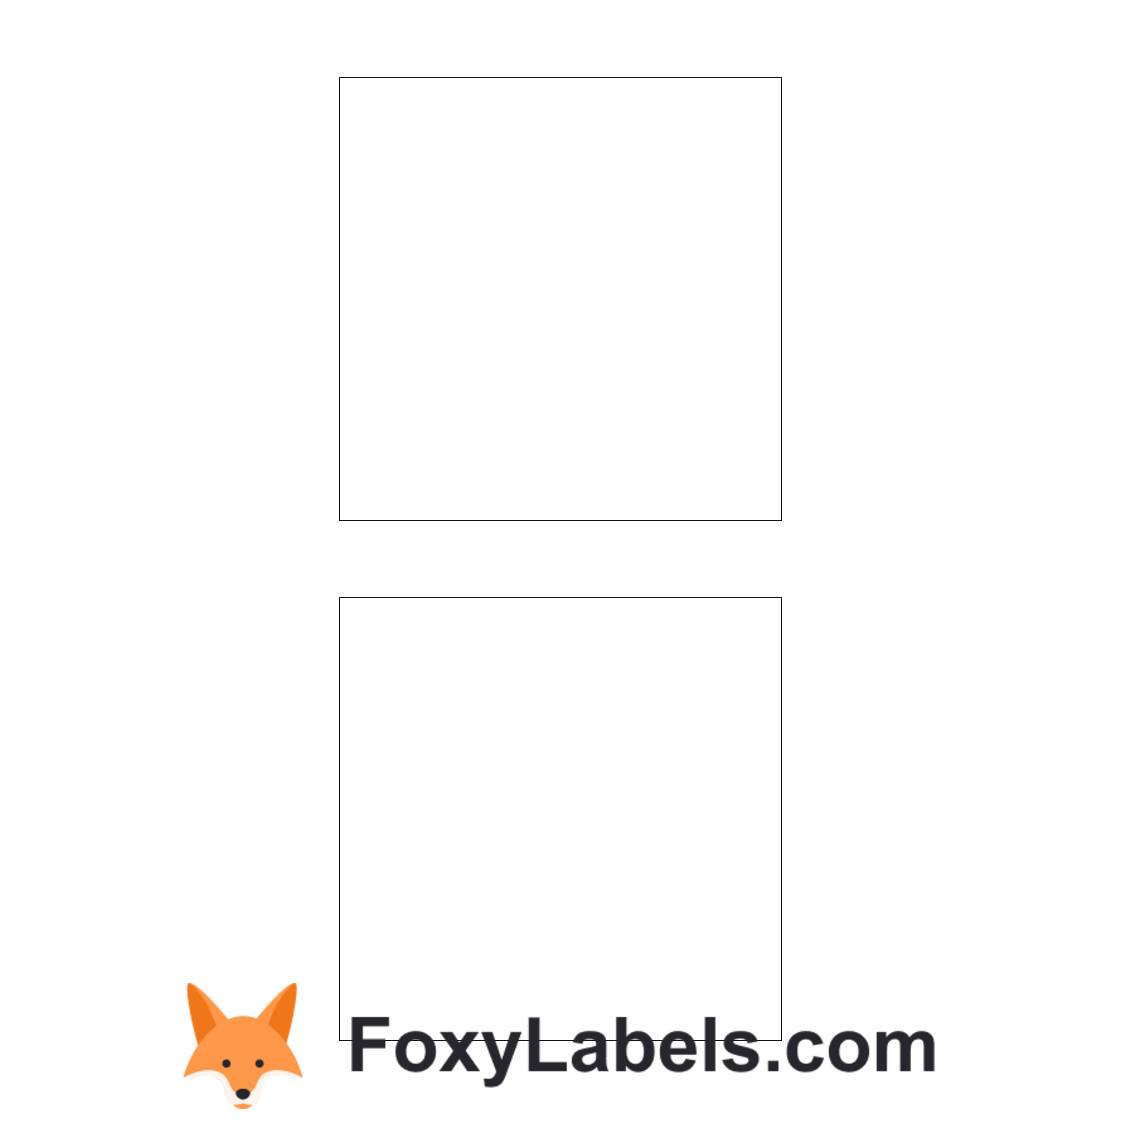 Avery C9660 label template for Google Docs